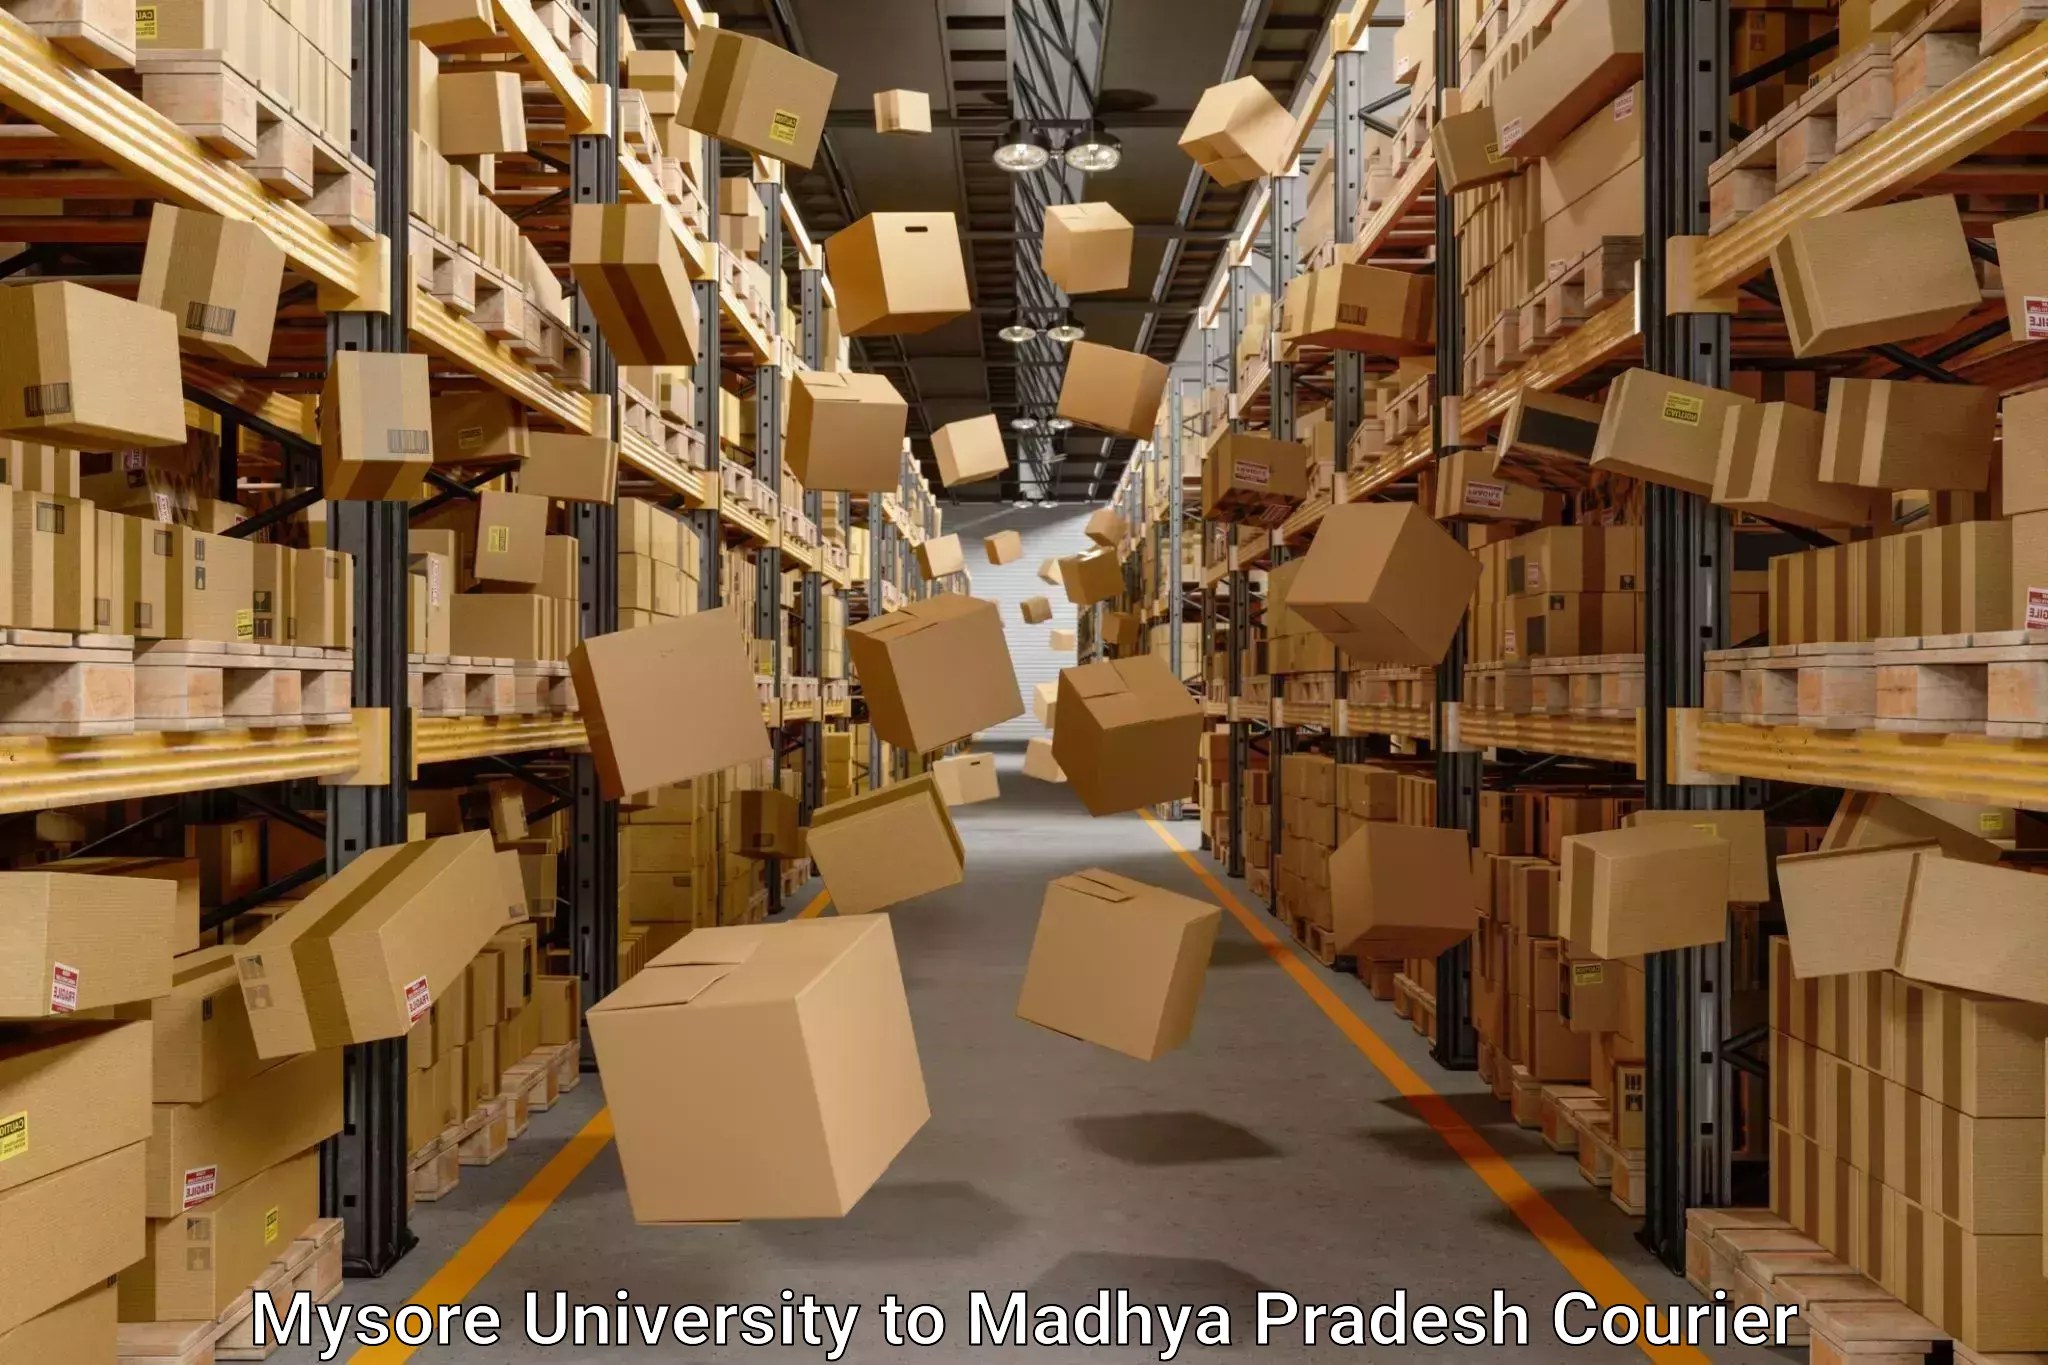 Efficient packing and moving Mysore University to Ranchha